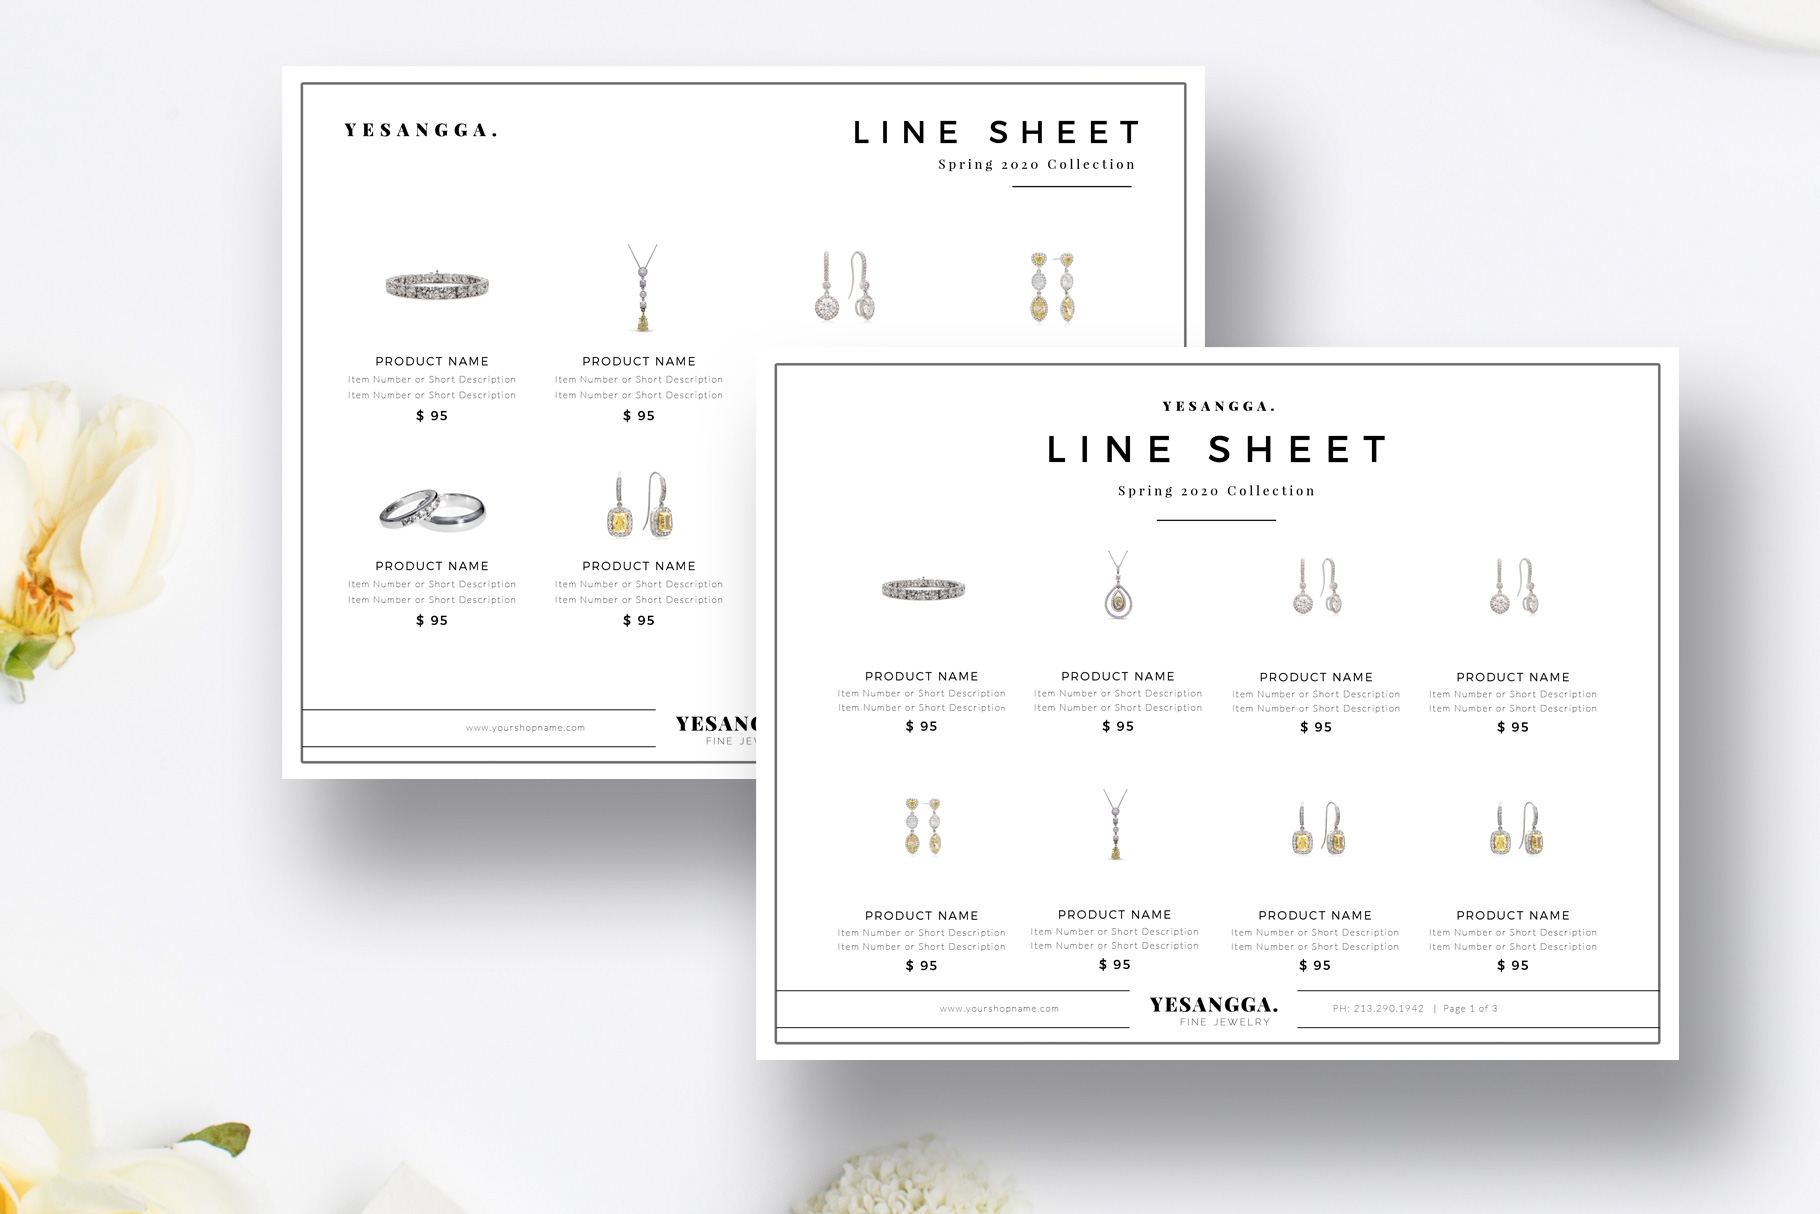 Minimalist Product Line Sheet Templates 4 Layouts Product Sales Sheet Photoshop Indesign Ms Word By Stephanie Design